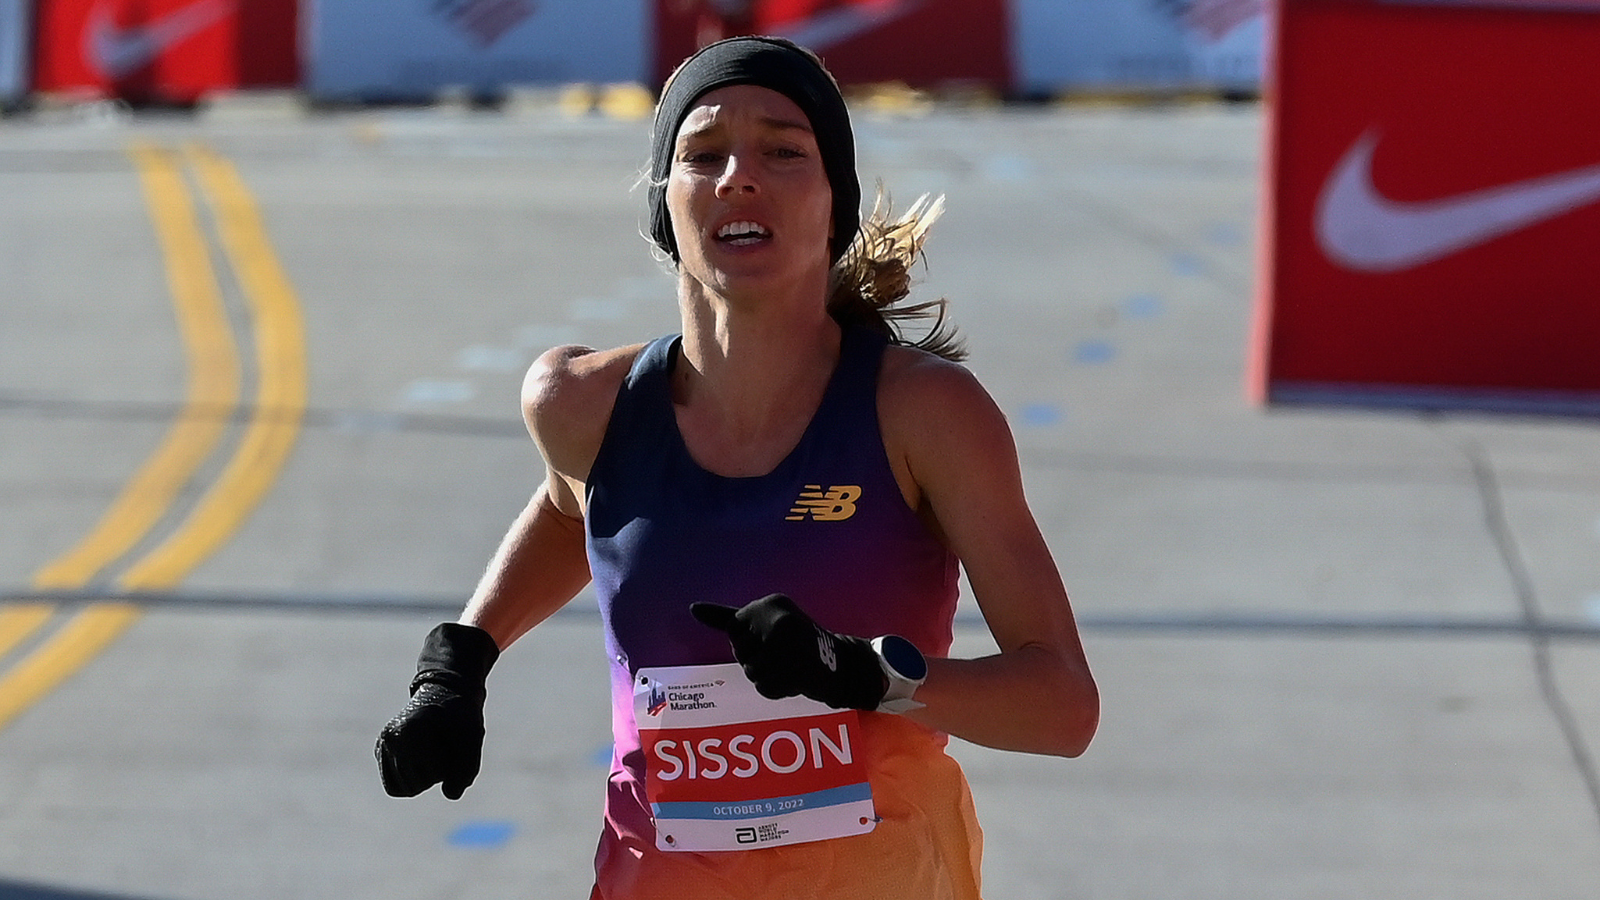 Emily Sisson Qualifies for Paris Olympics with Second Place Finish in U.S. Olympic Marathon Trials